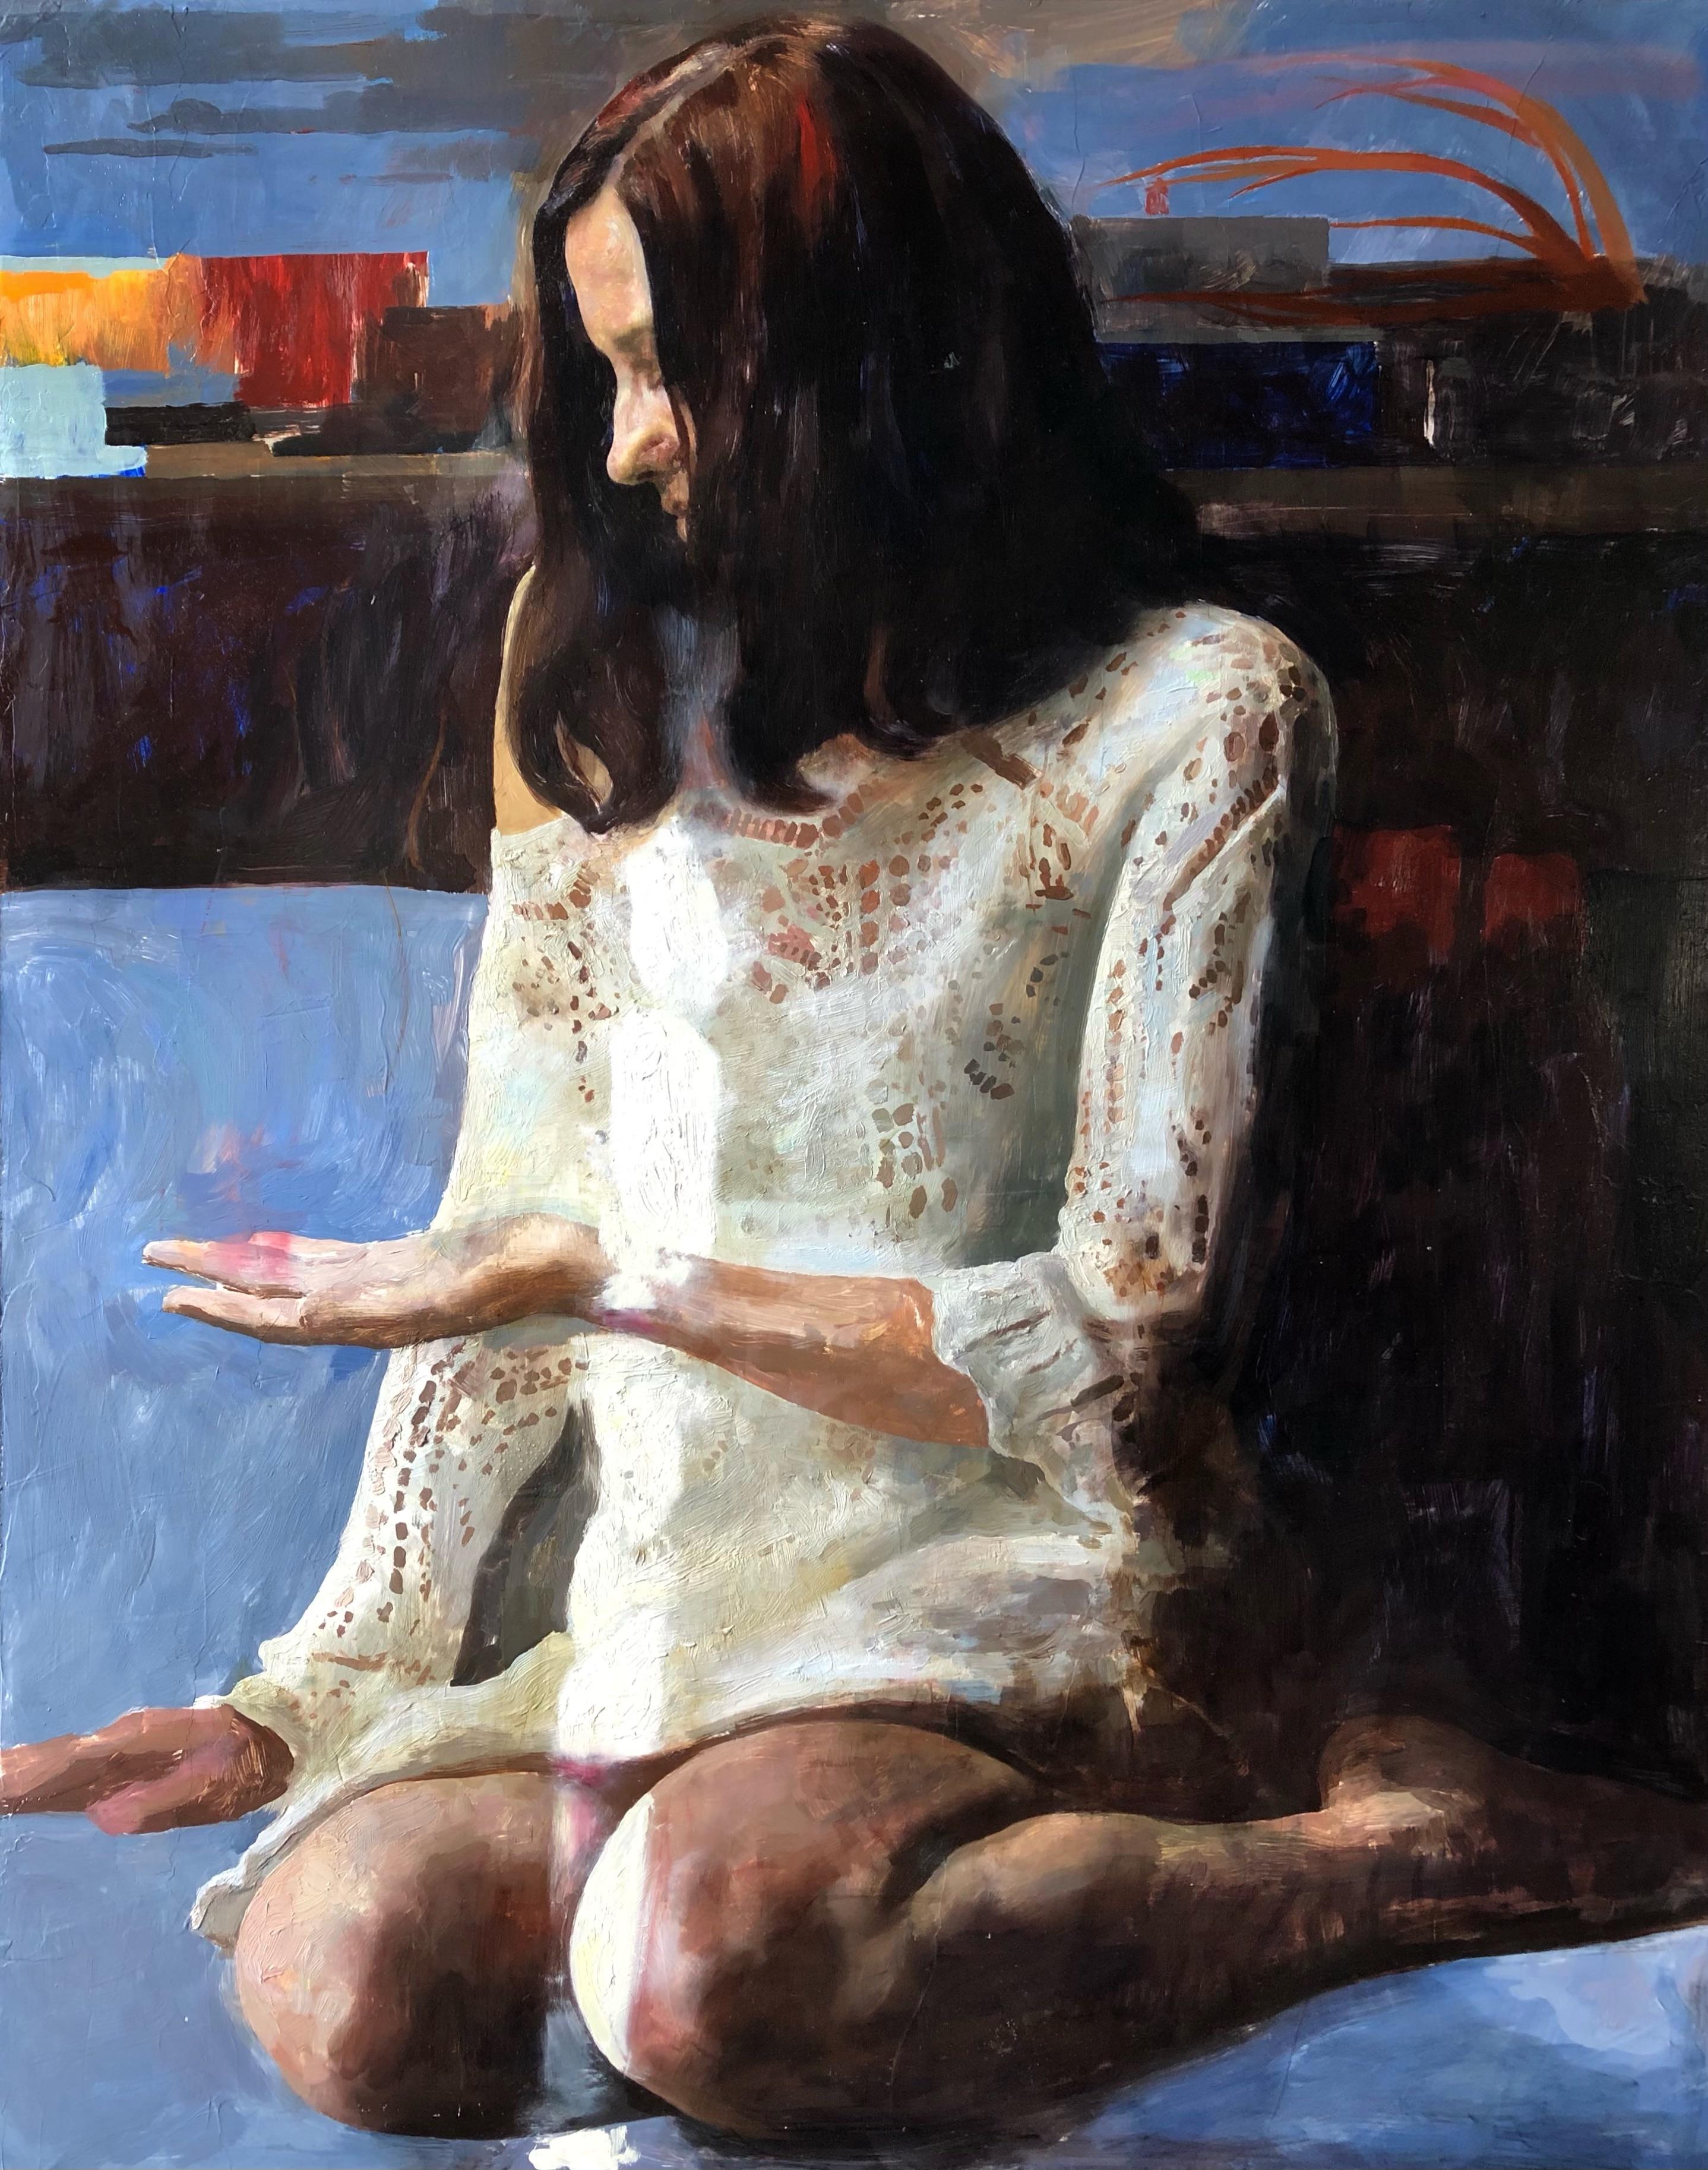 Hollis Dunlap Portrait Painting - "The Invisible Object, " Oil painting